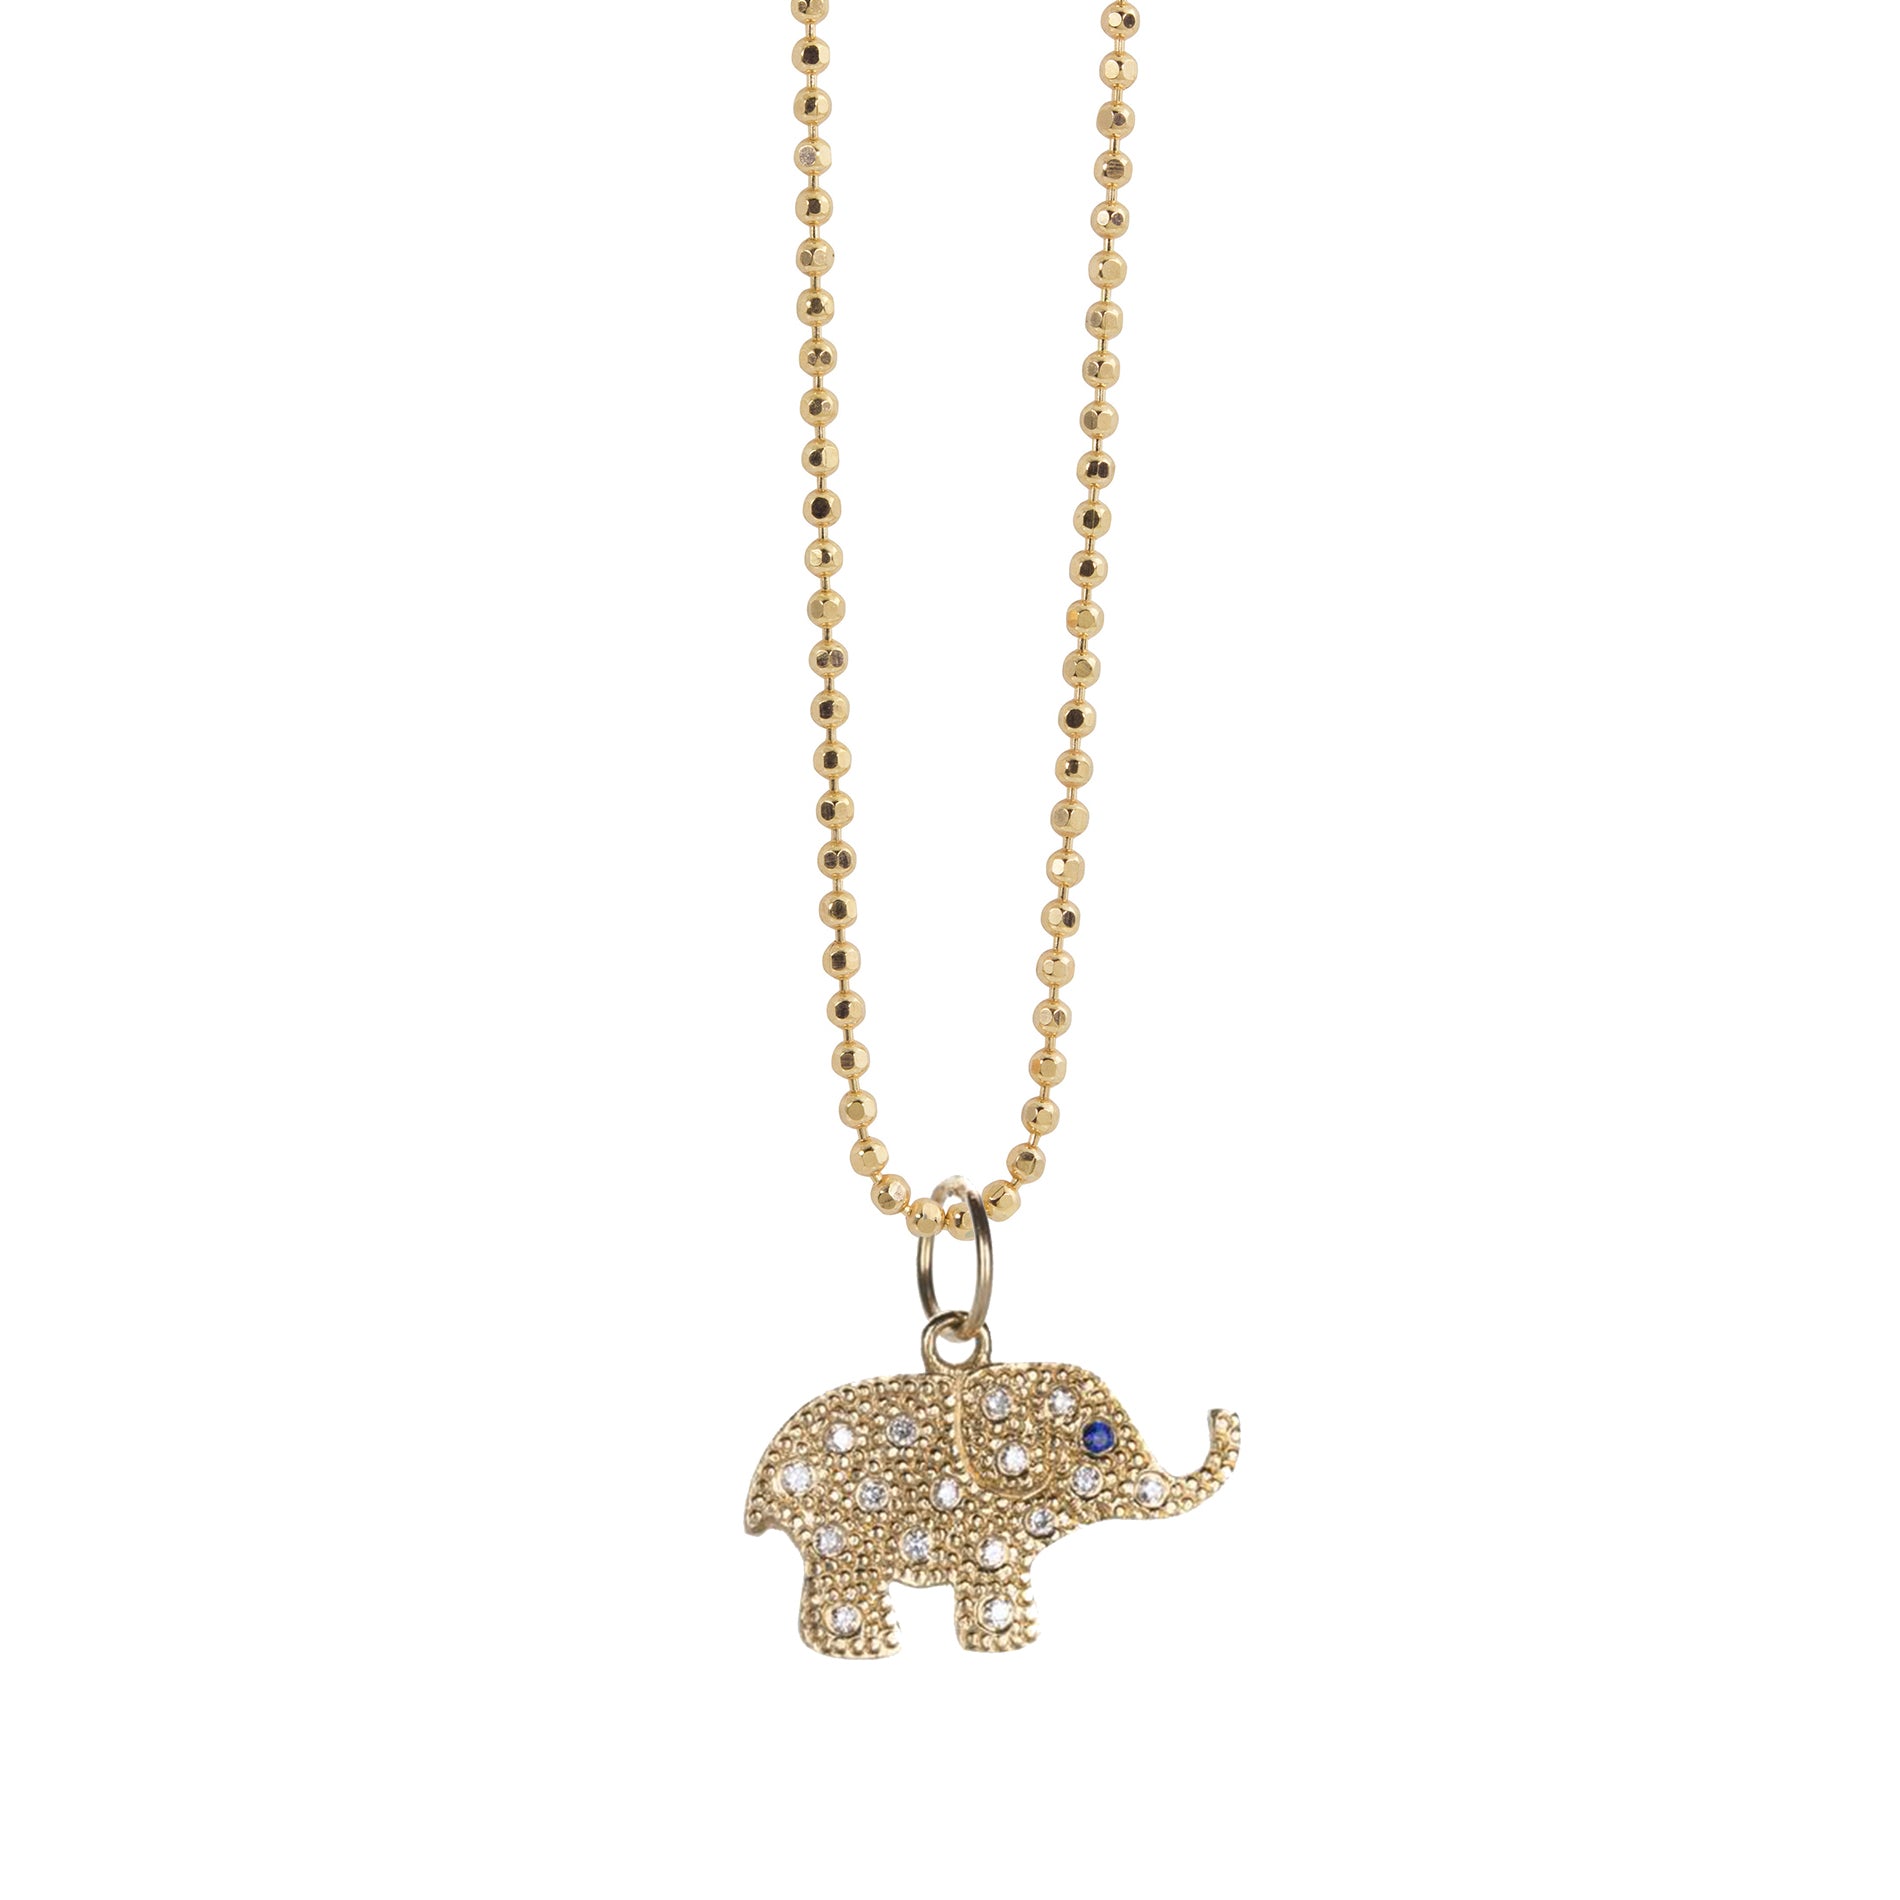 14k yellow gold baby ELLI elephant charm with scattered diamonds and sapphire eye